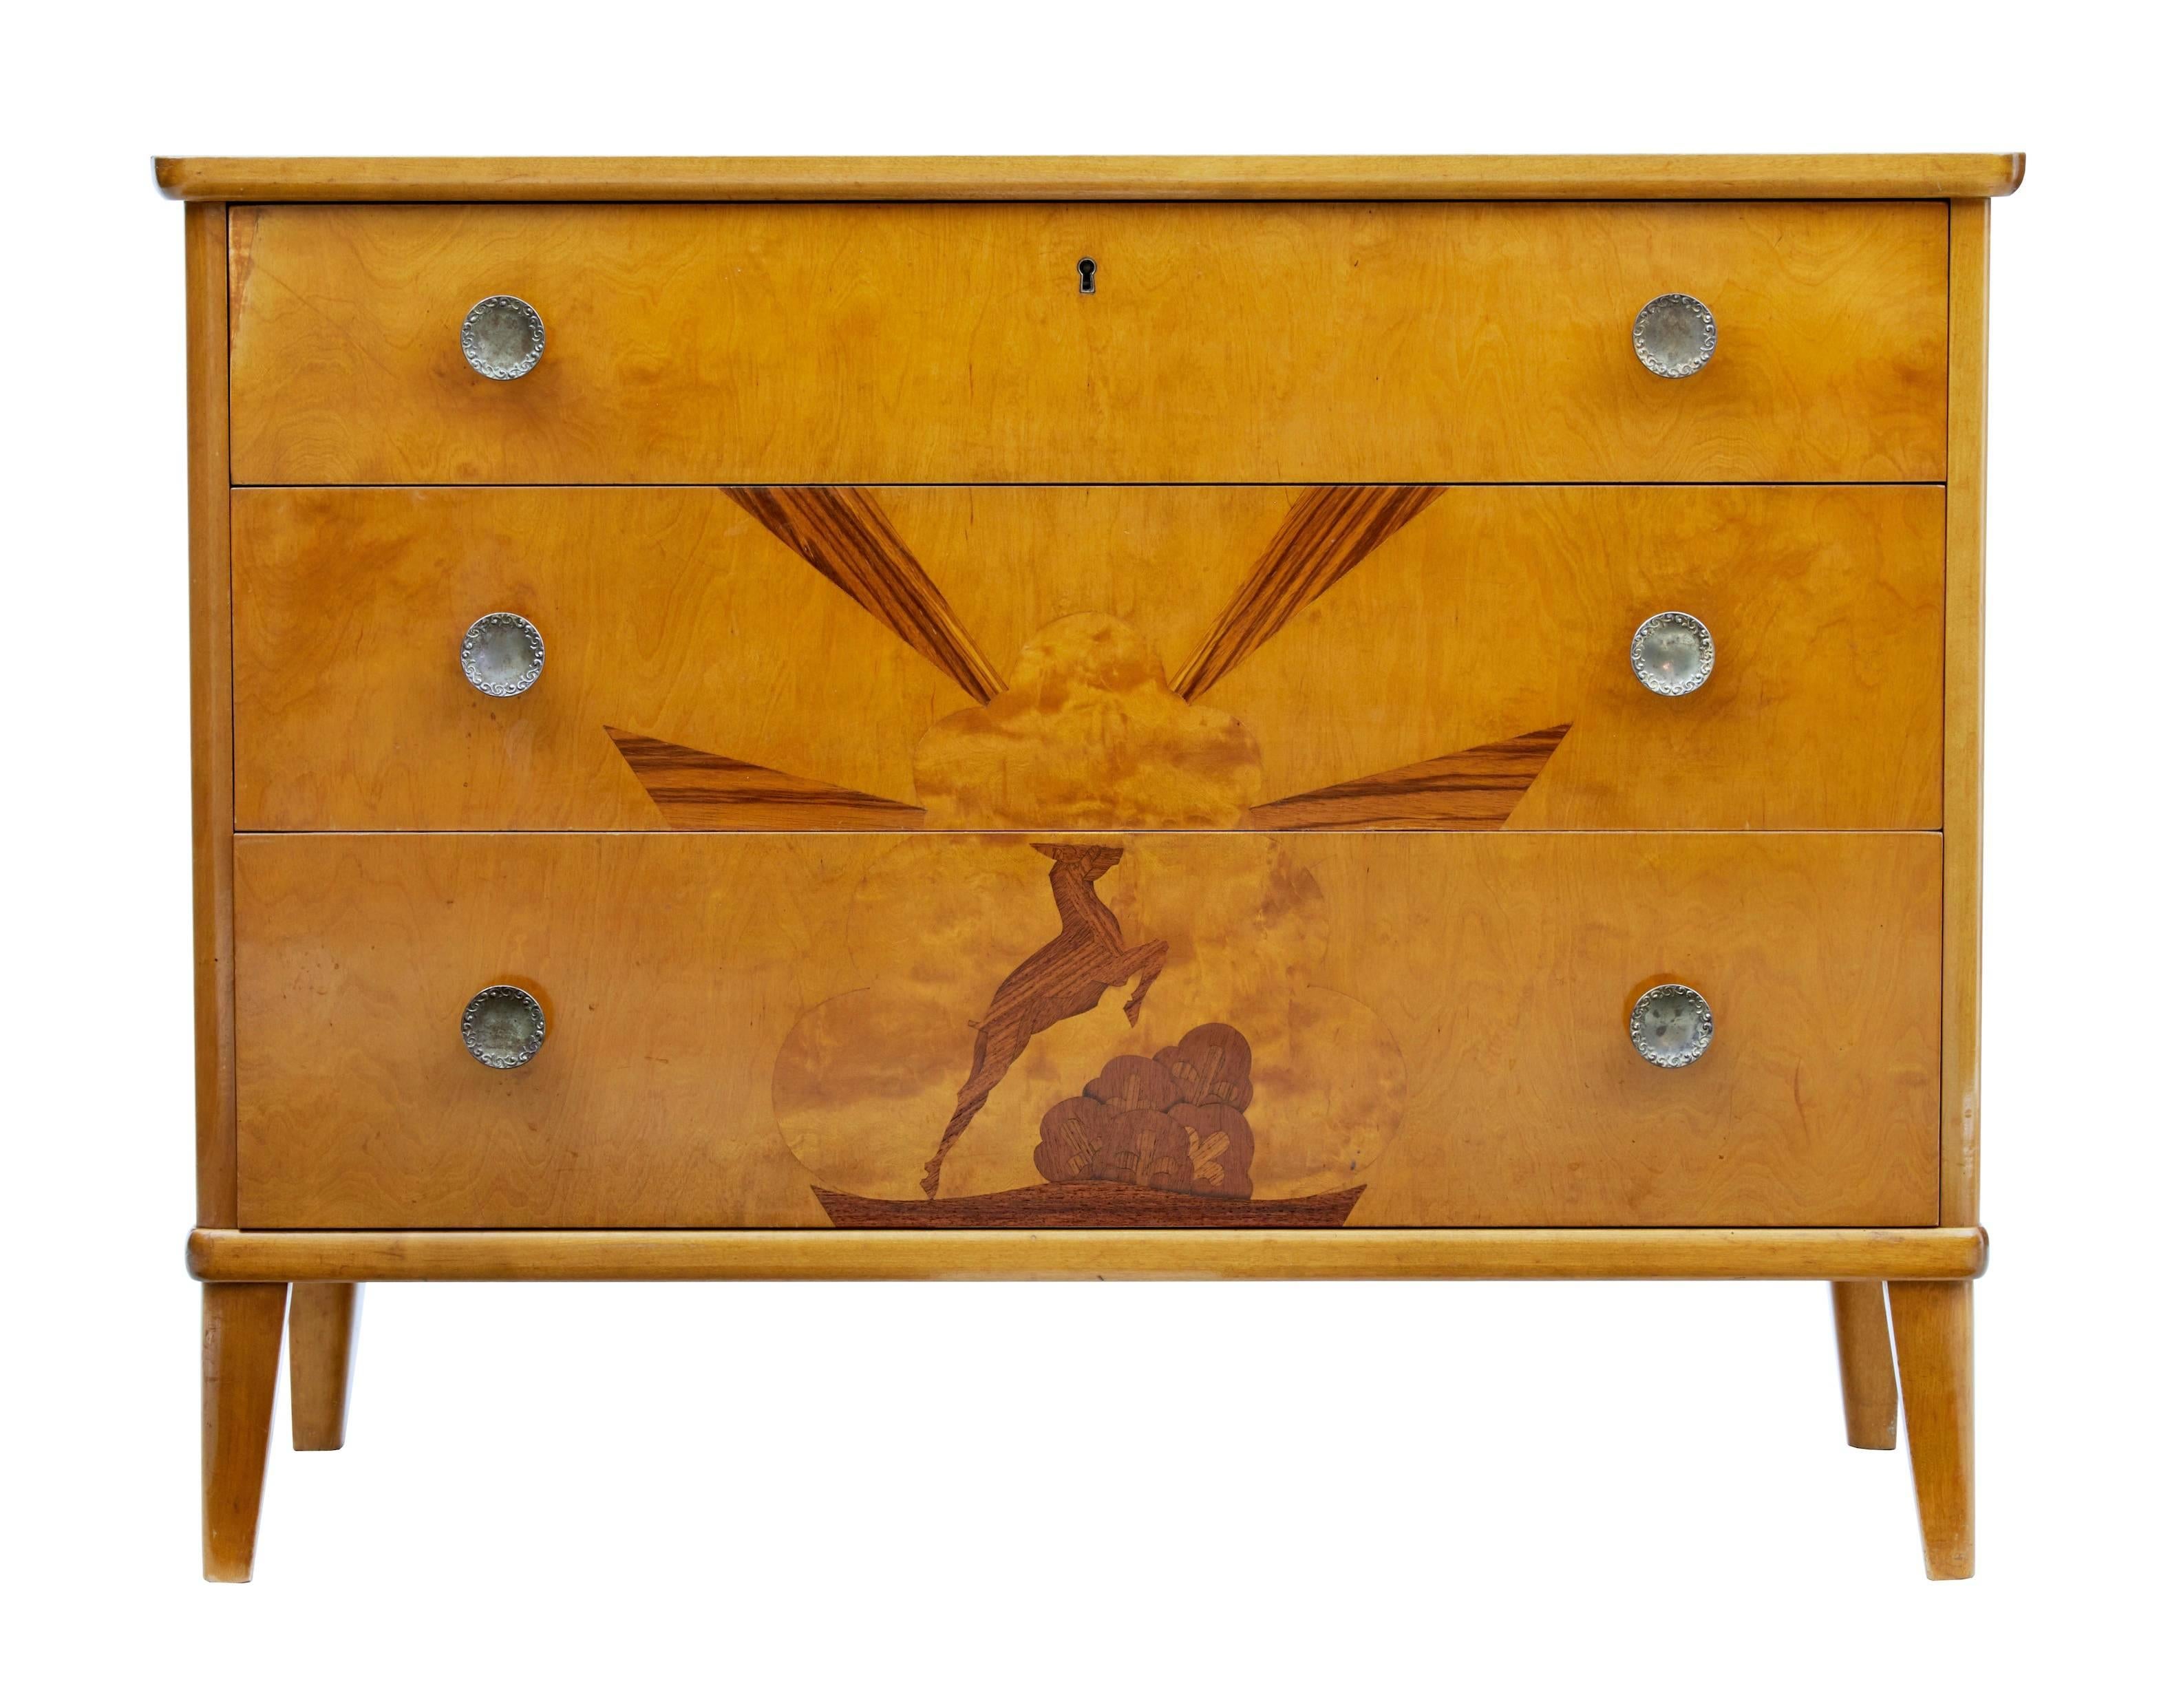 Late Art Deco Swedish birch chest of drawers, circa 1935.
Beautifully inlaid to the front in rosewood depicting a prancing stag and sunburst.
Three drawers with original handles.
Good rich birch color.
Minor surface marks in line with